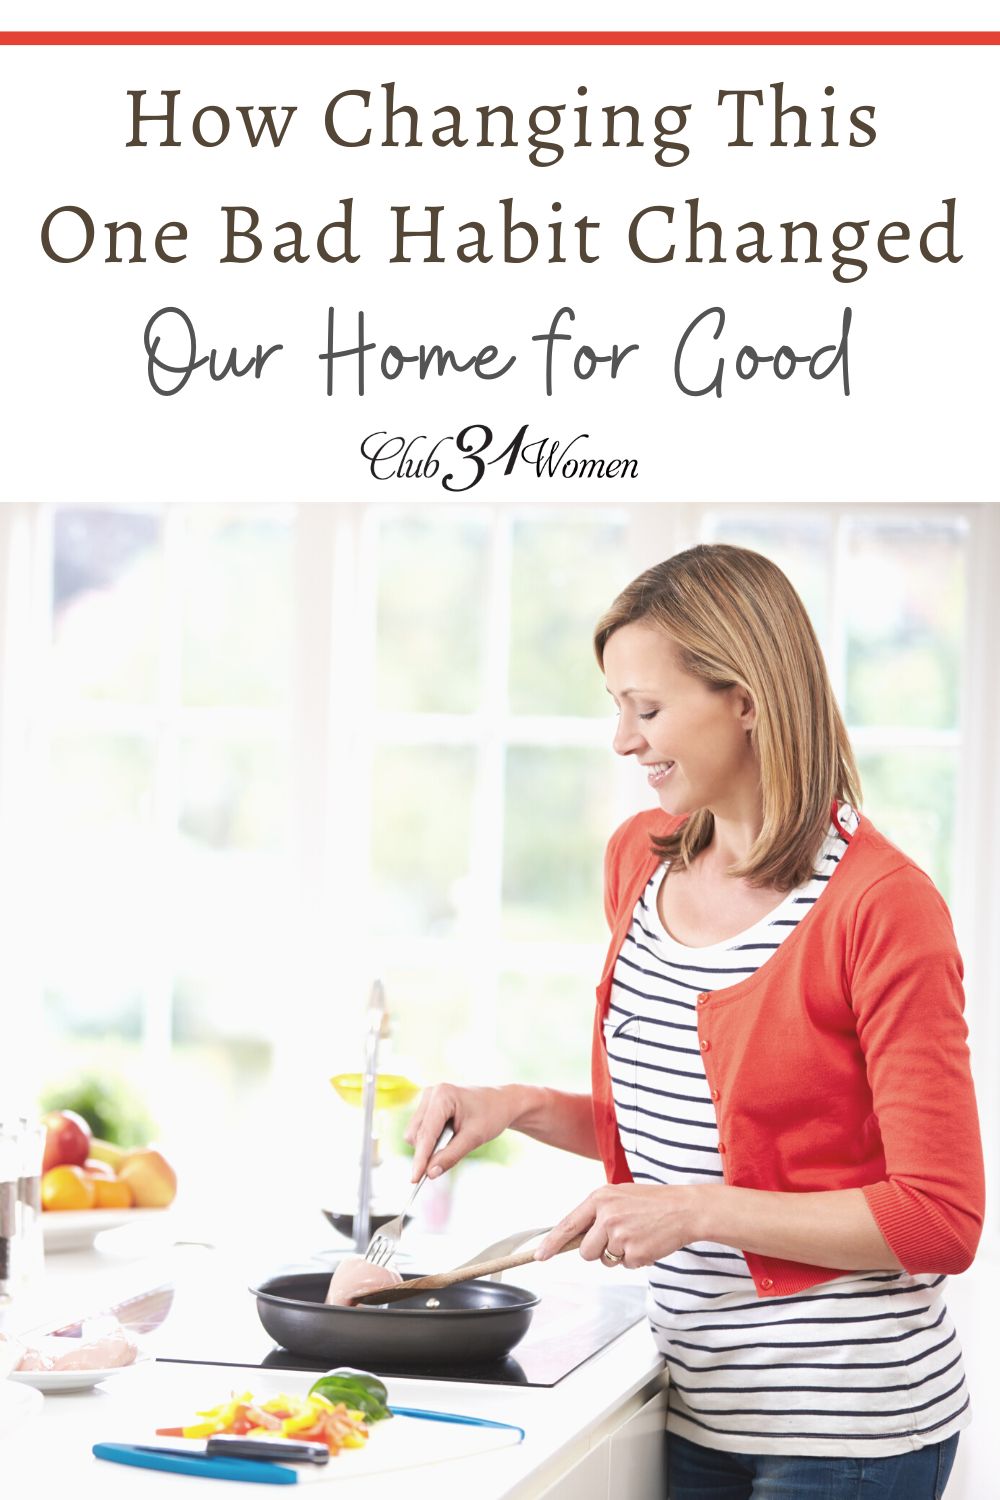 Who would've thought changing this one bad habit would make such a difference? Here's a simple, but powerful way to breathe life back into your home. ~ Club31Women via @Club31Women